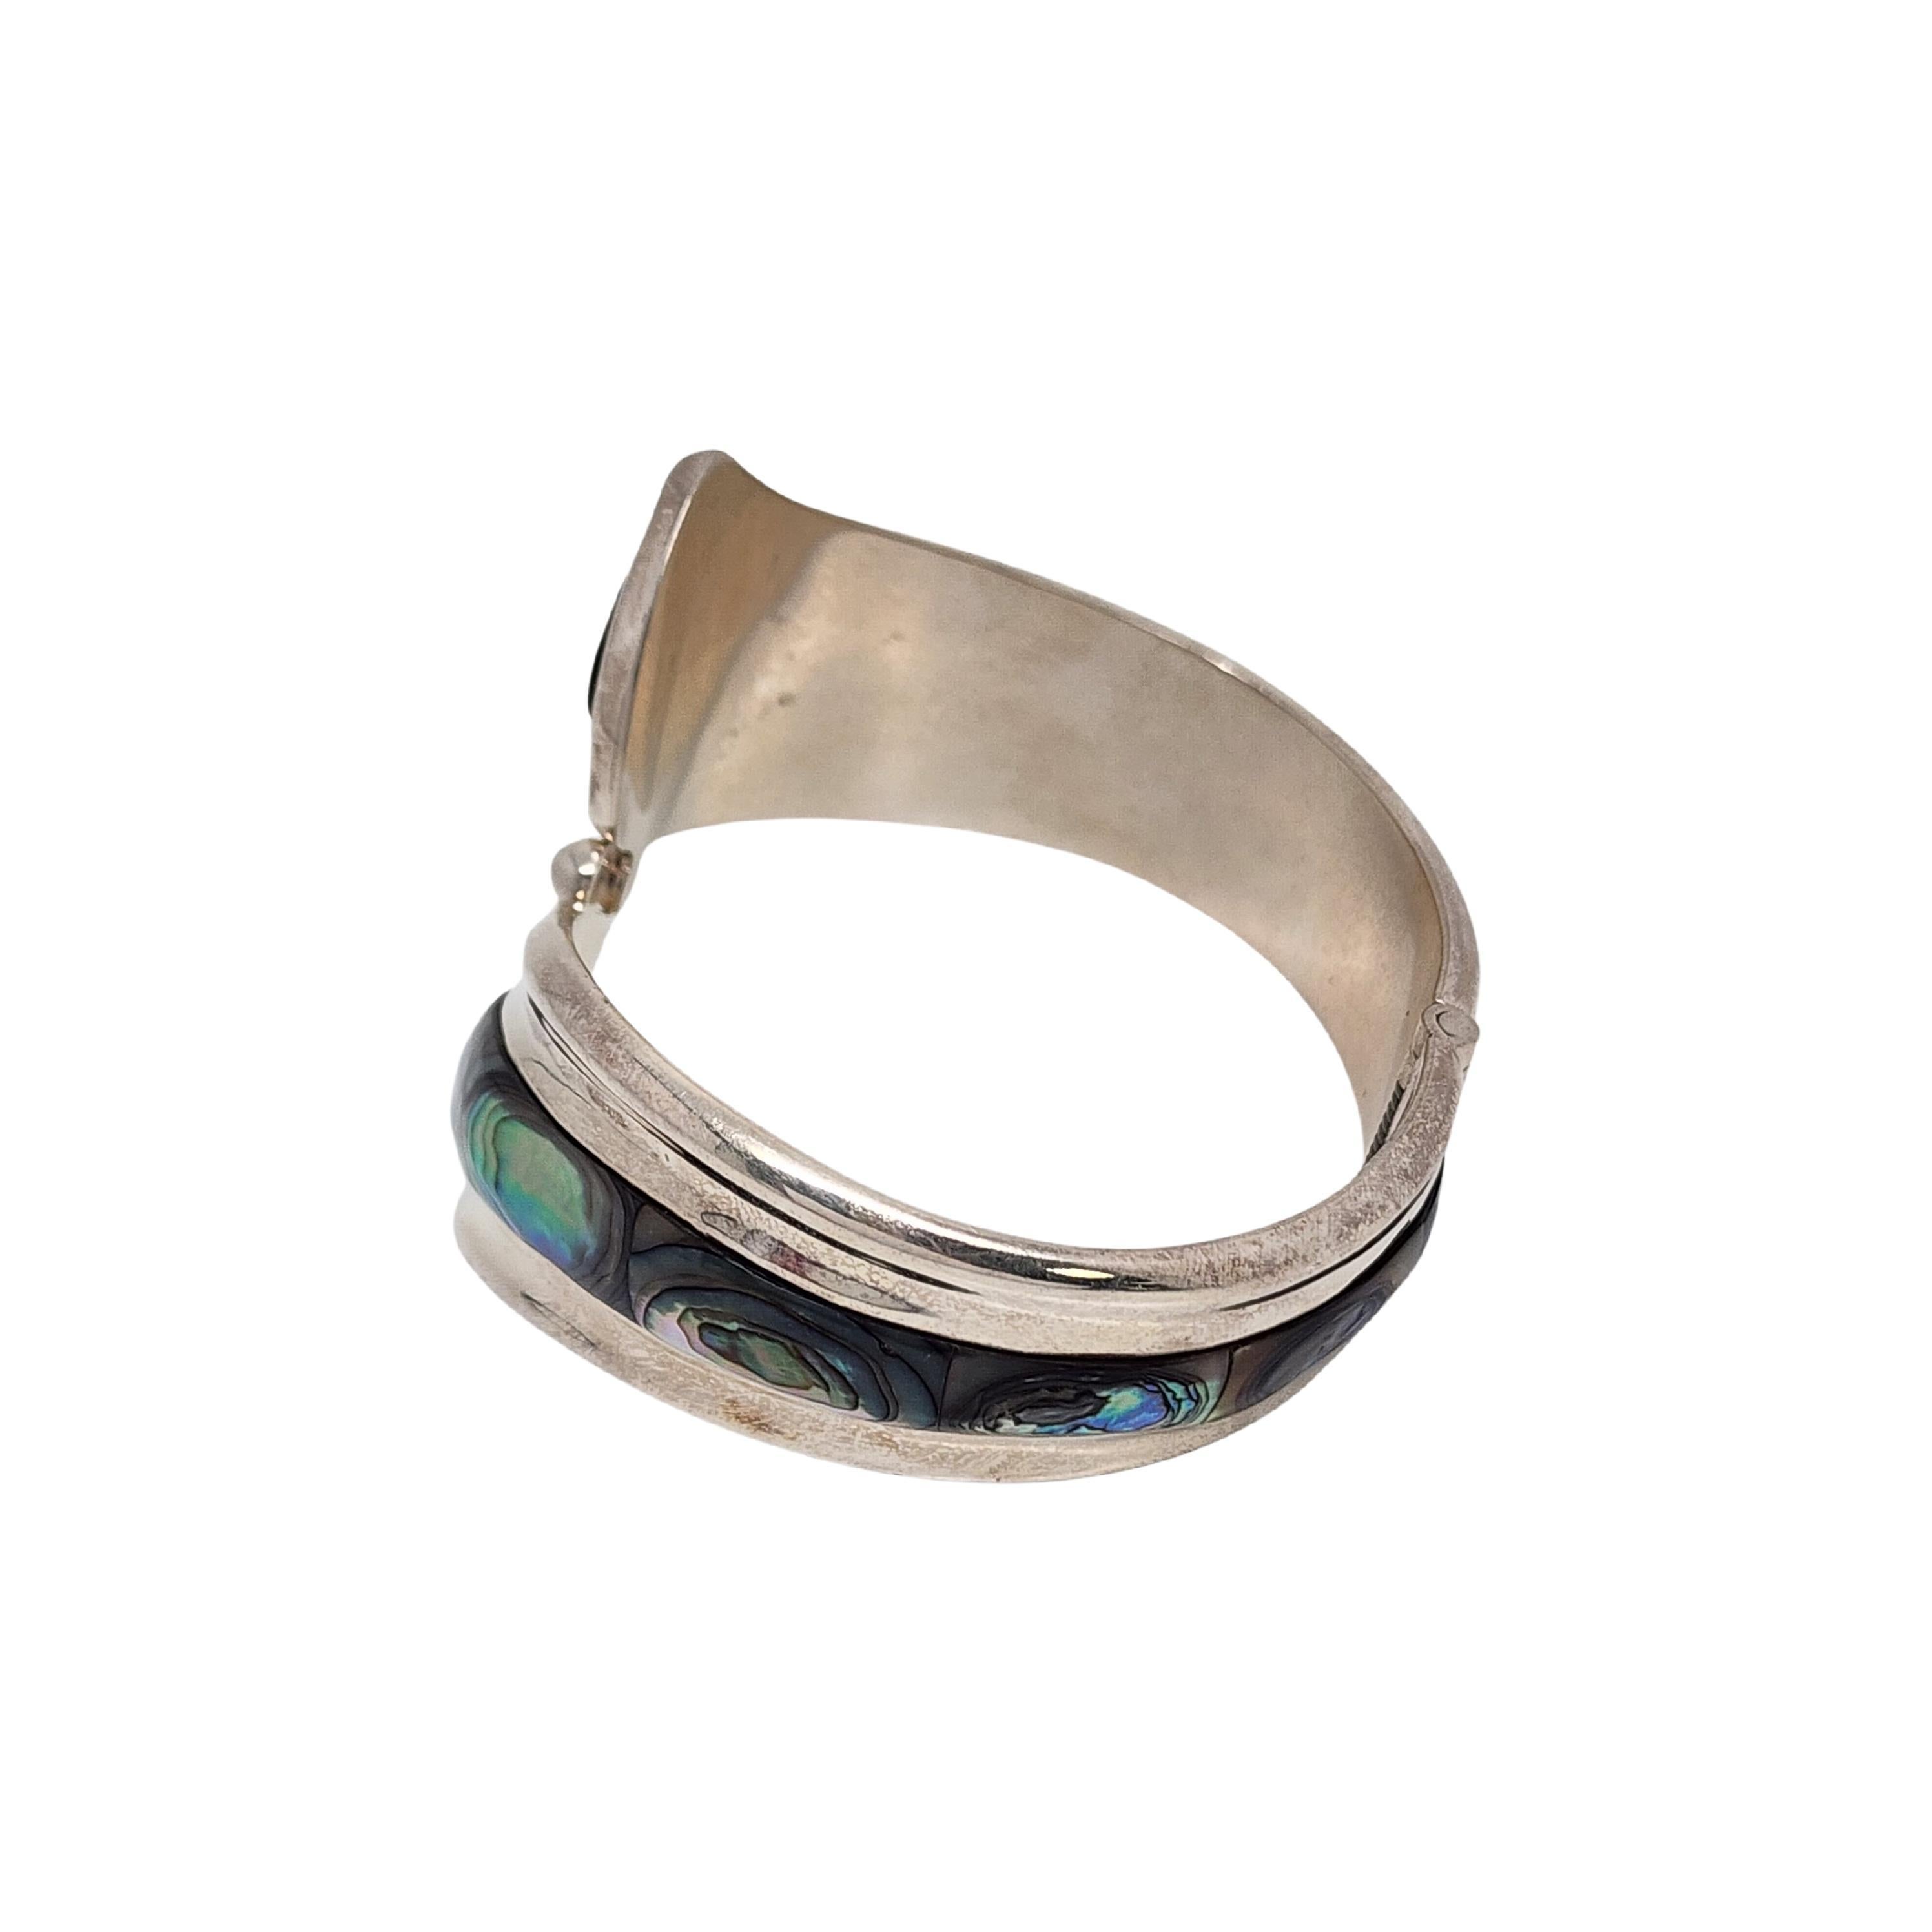 Sterling silver and abalone shell hinged bracelet from Mexico.

A large and significant bracelet featuring beautiful abalone shell in a hinged bypass design.

Weighs approx 62.0g, 39.9dwt

Measures approx 7 1/4